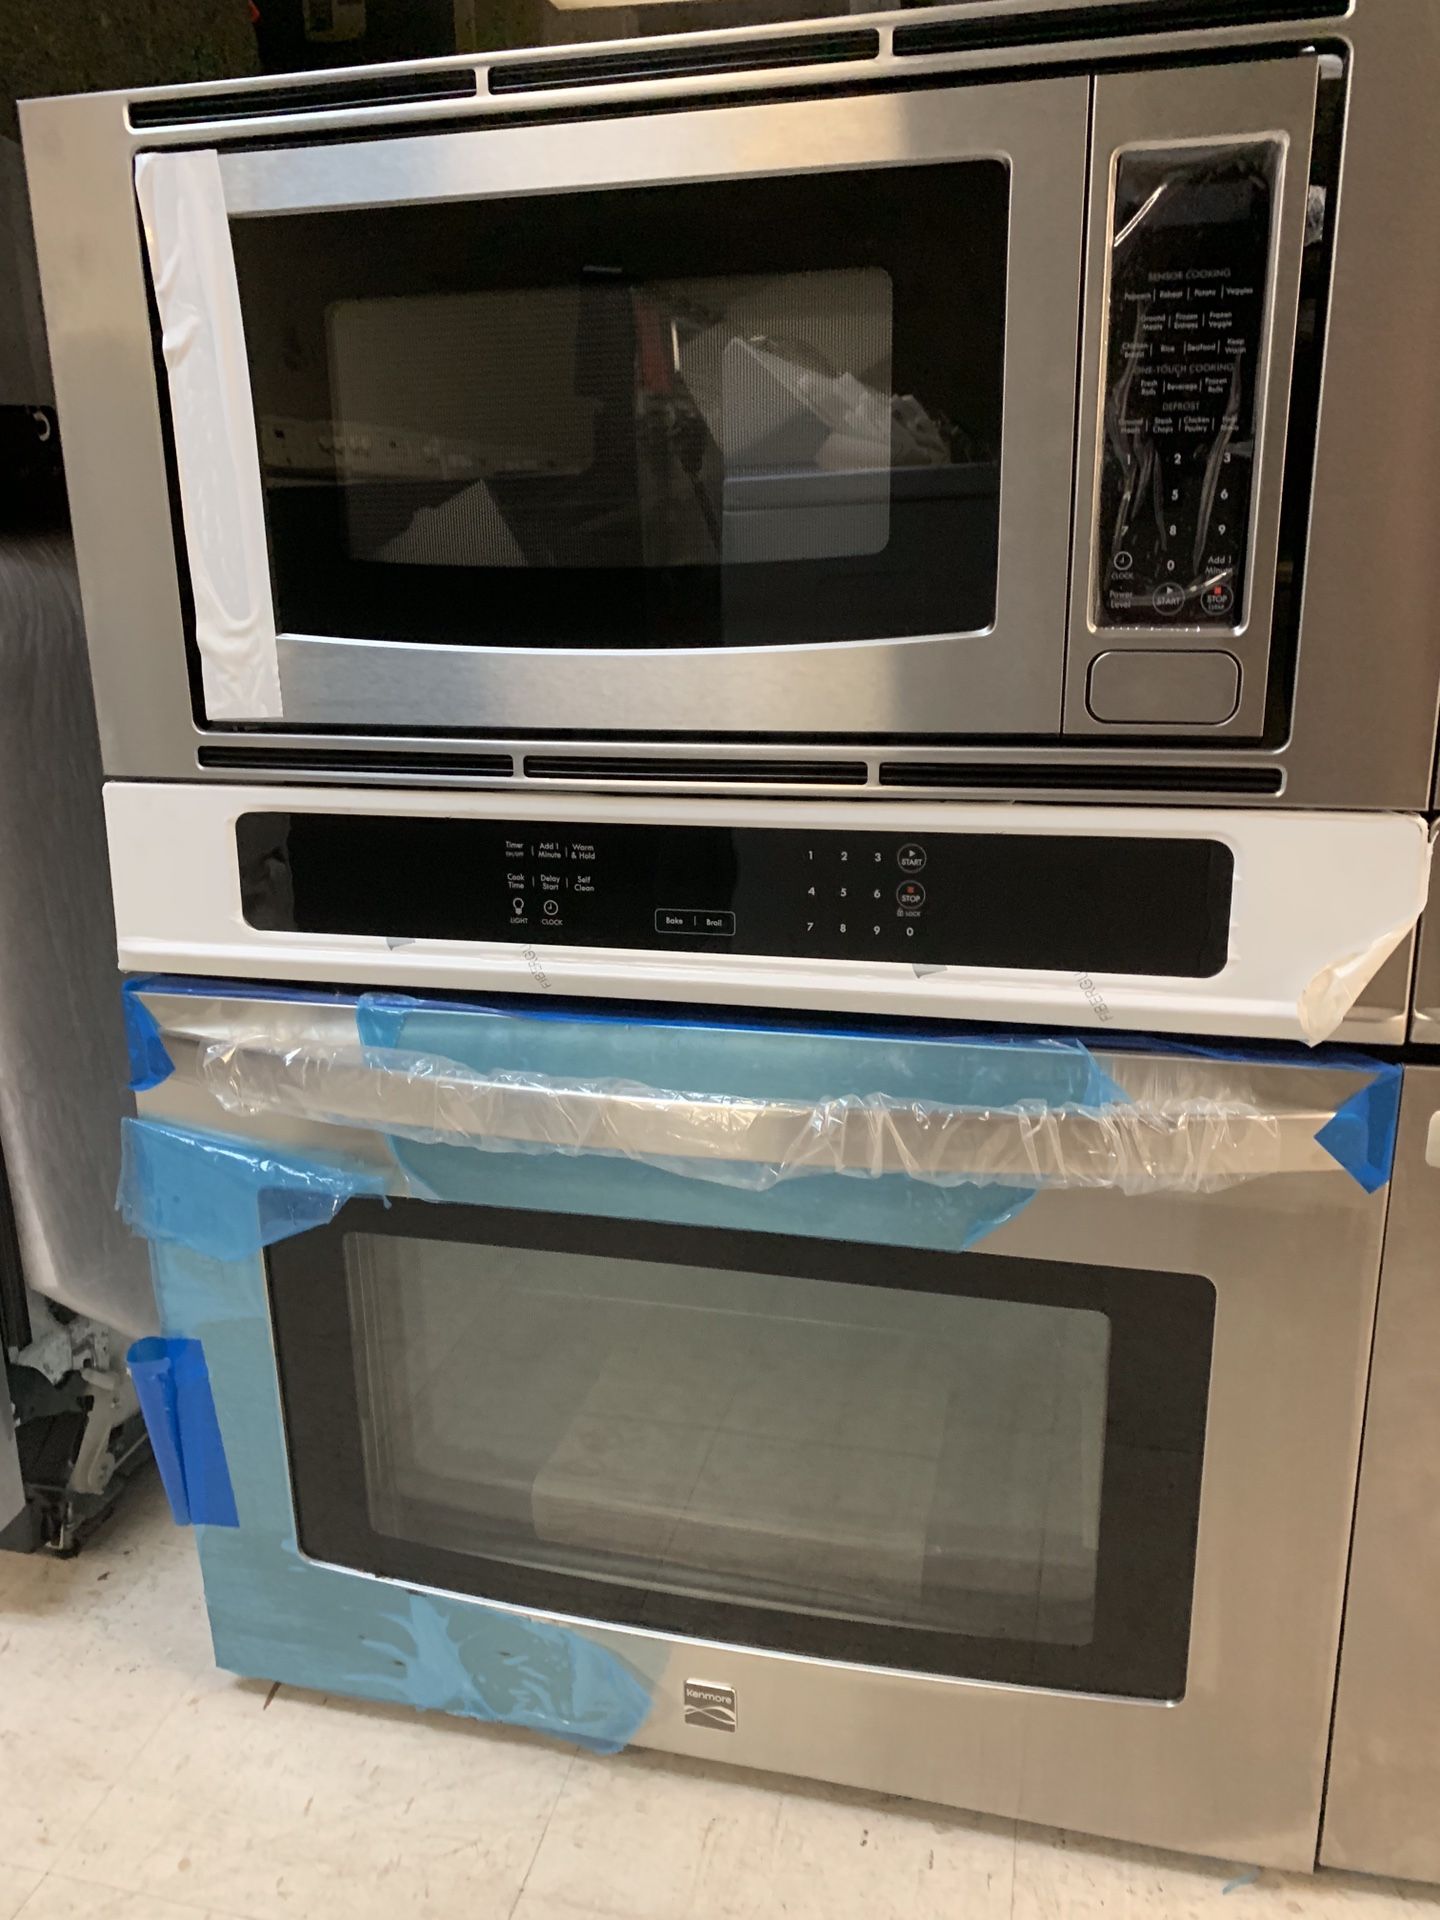 Brand new stainless wall oven and microwave combination 30"wide